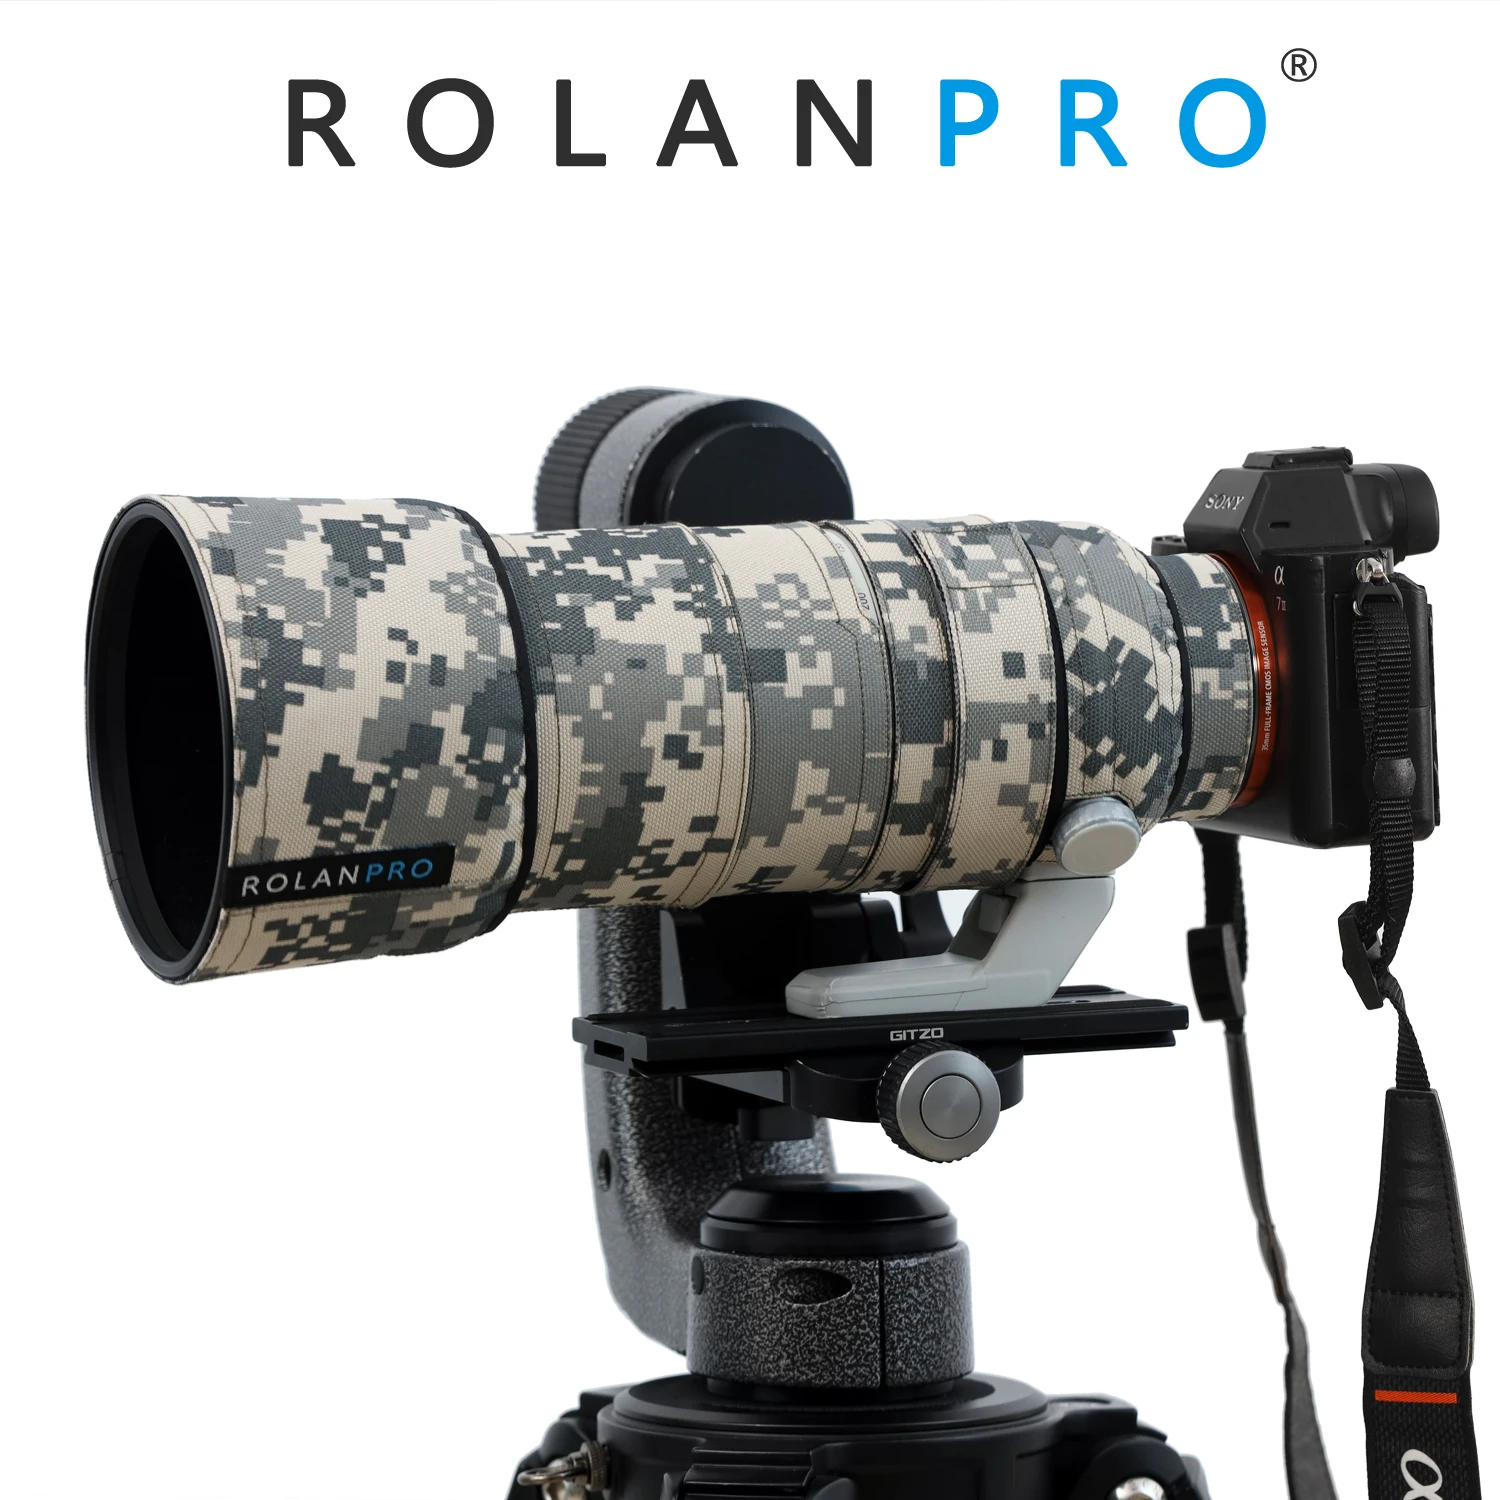 ROLANPRO Waterproof Lens Camouflage Coat Rain Cover for sony FE 70-200mm F2.8 GM OSS II Lens SEL70200GM Protective Case Guns camera and lens backpack